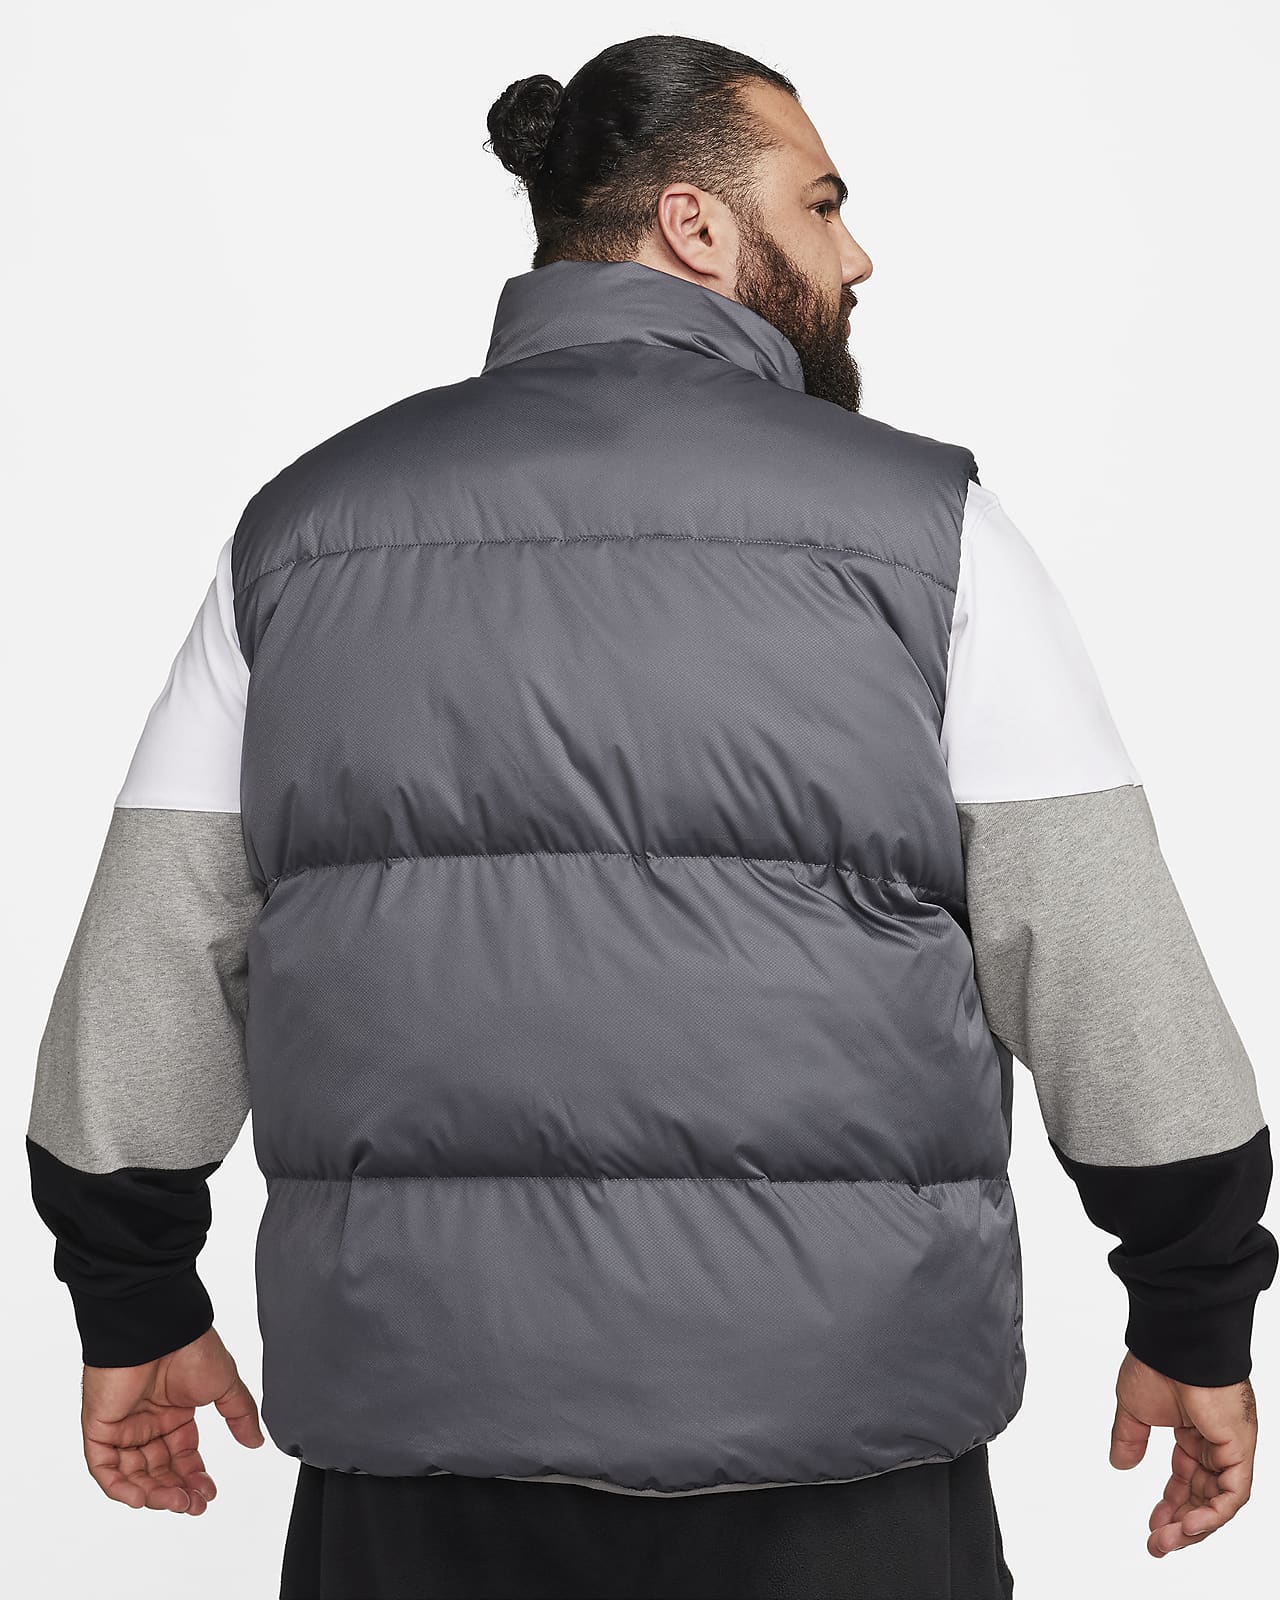 The Best Puffer Vests for Men on the Move